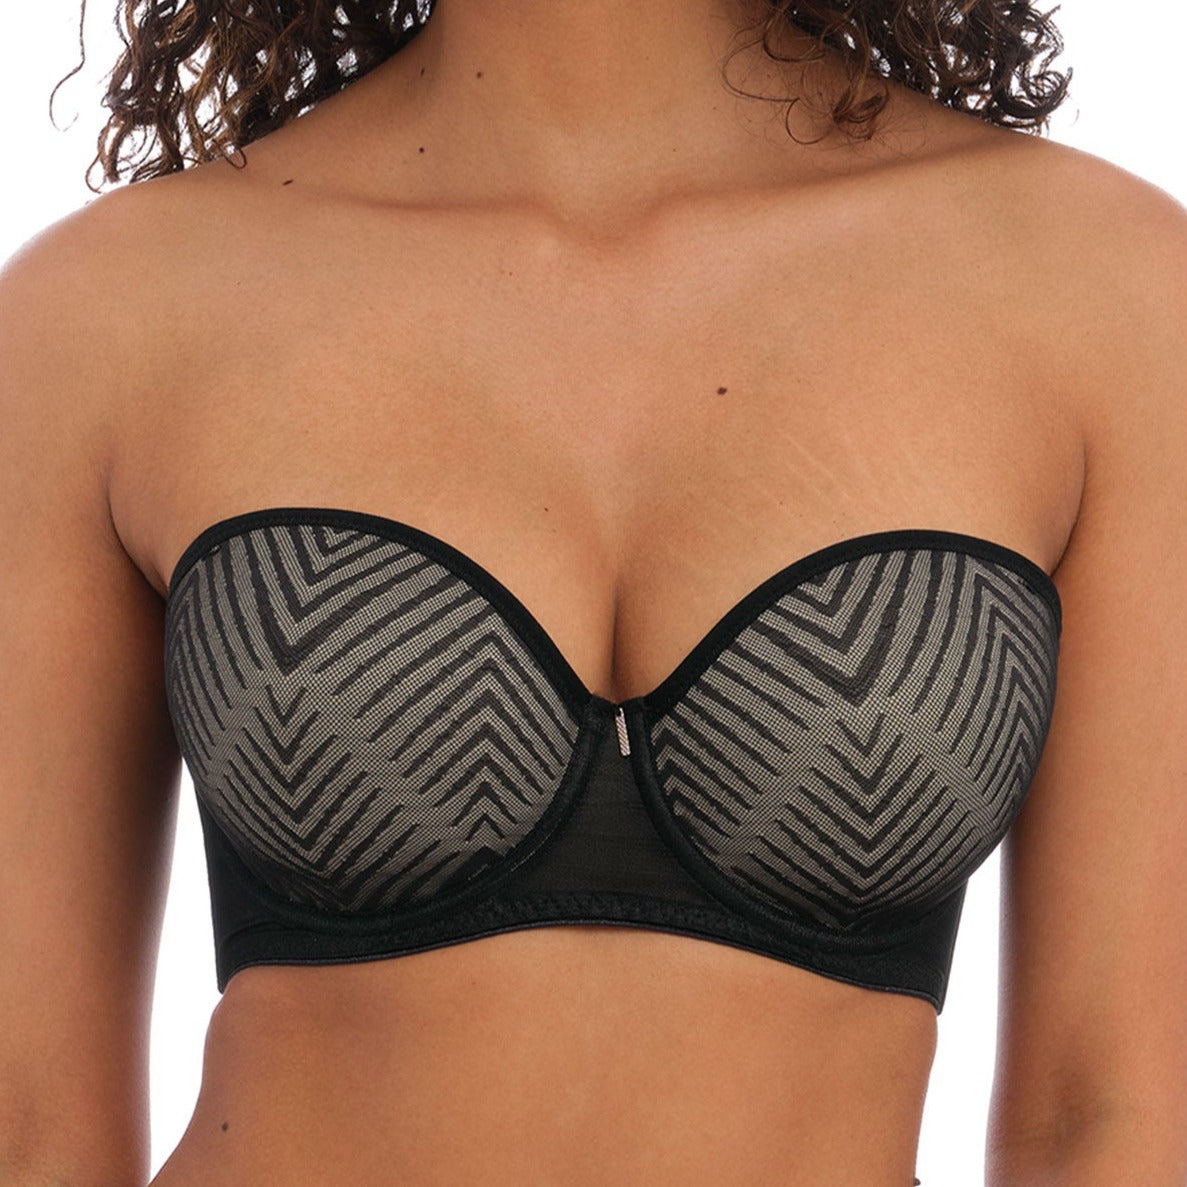 Tailored Moulded Strapless Bra - AA401109 - Black Bras & Lingerie - Bras - Strapless Bras Freya 32E BLACK 